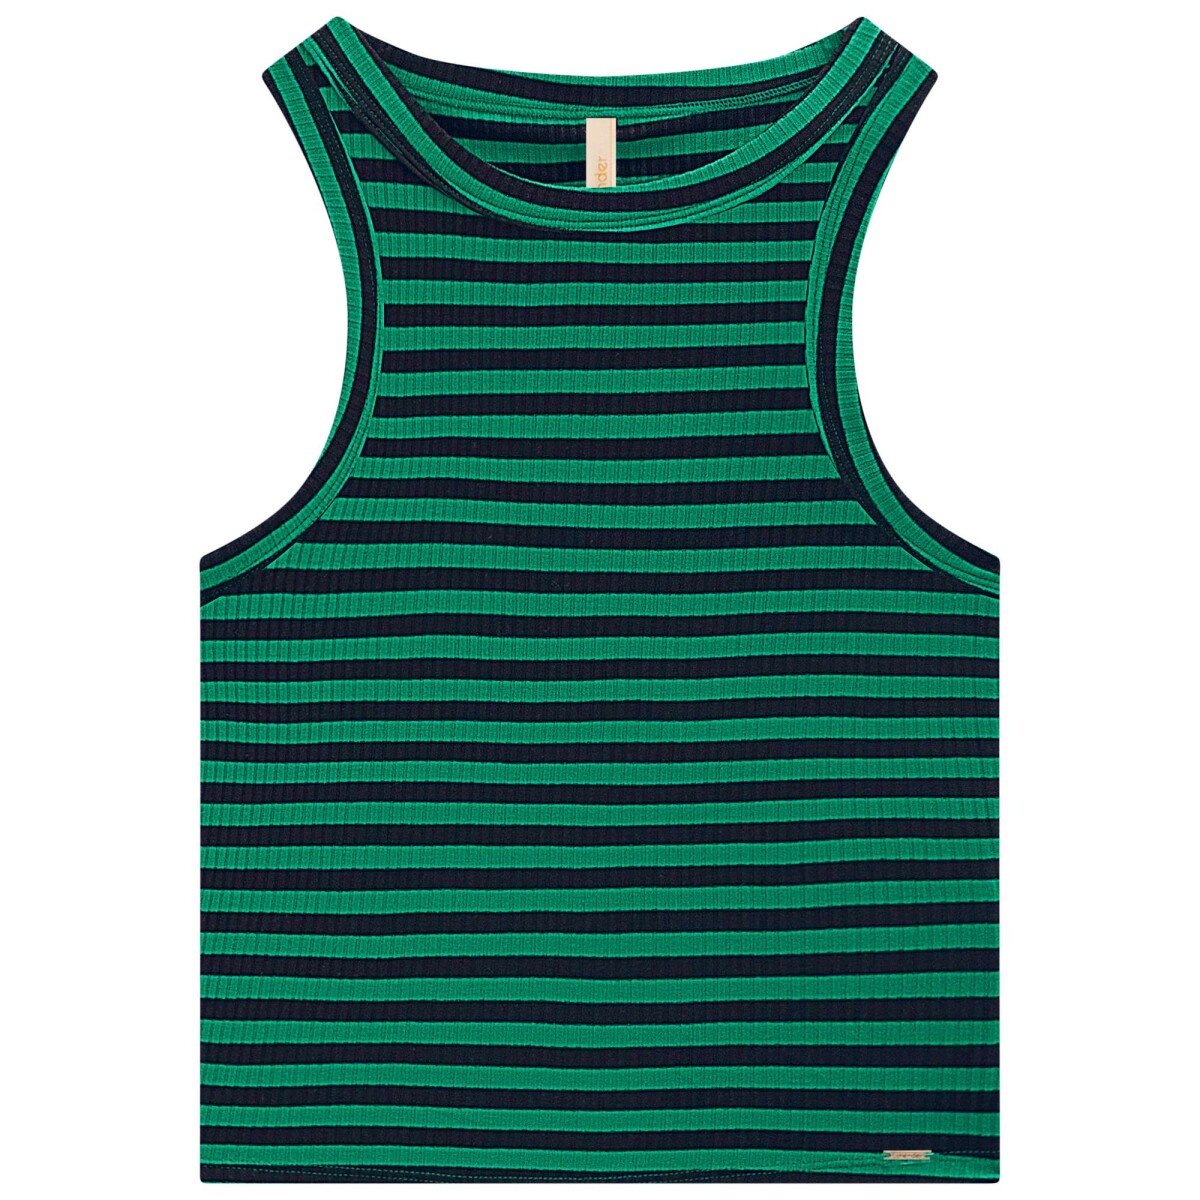 MUSCULOSA A RAYAS - VERDE 